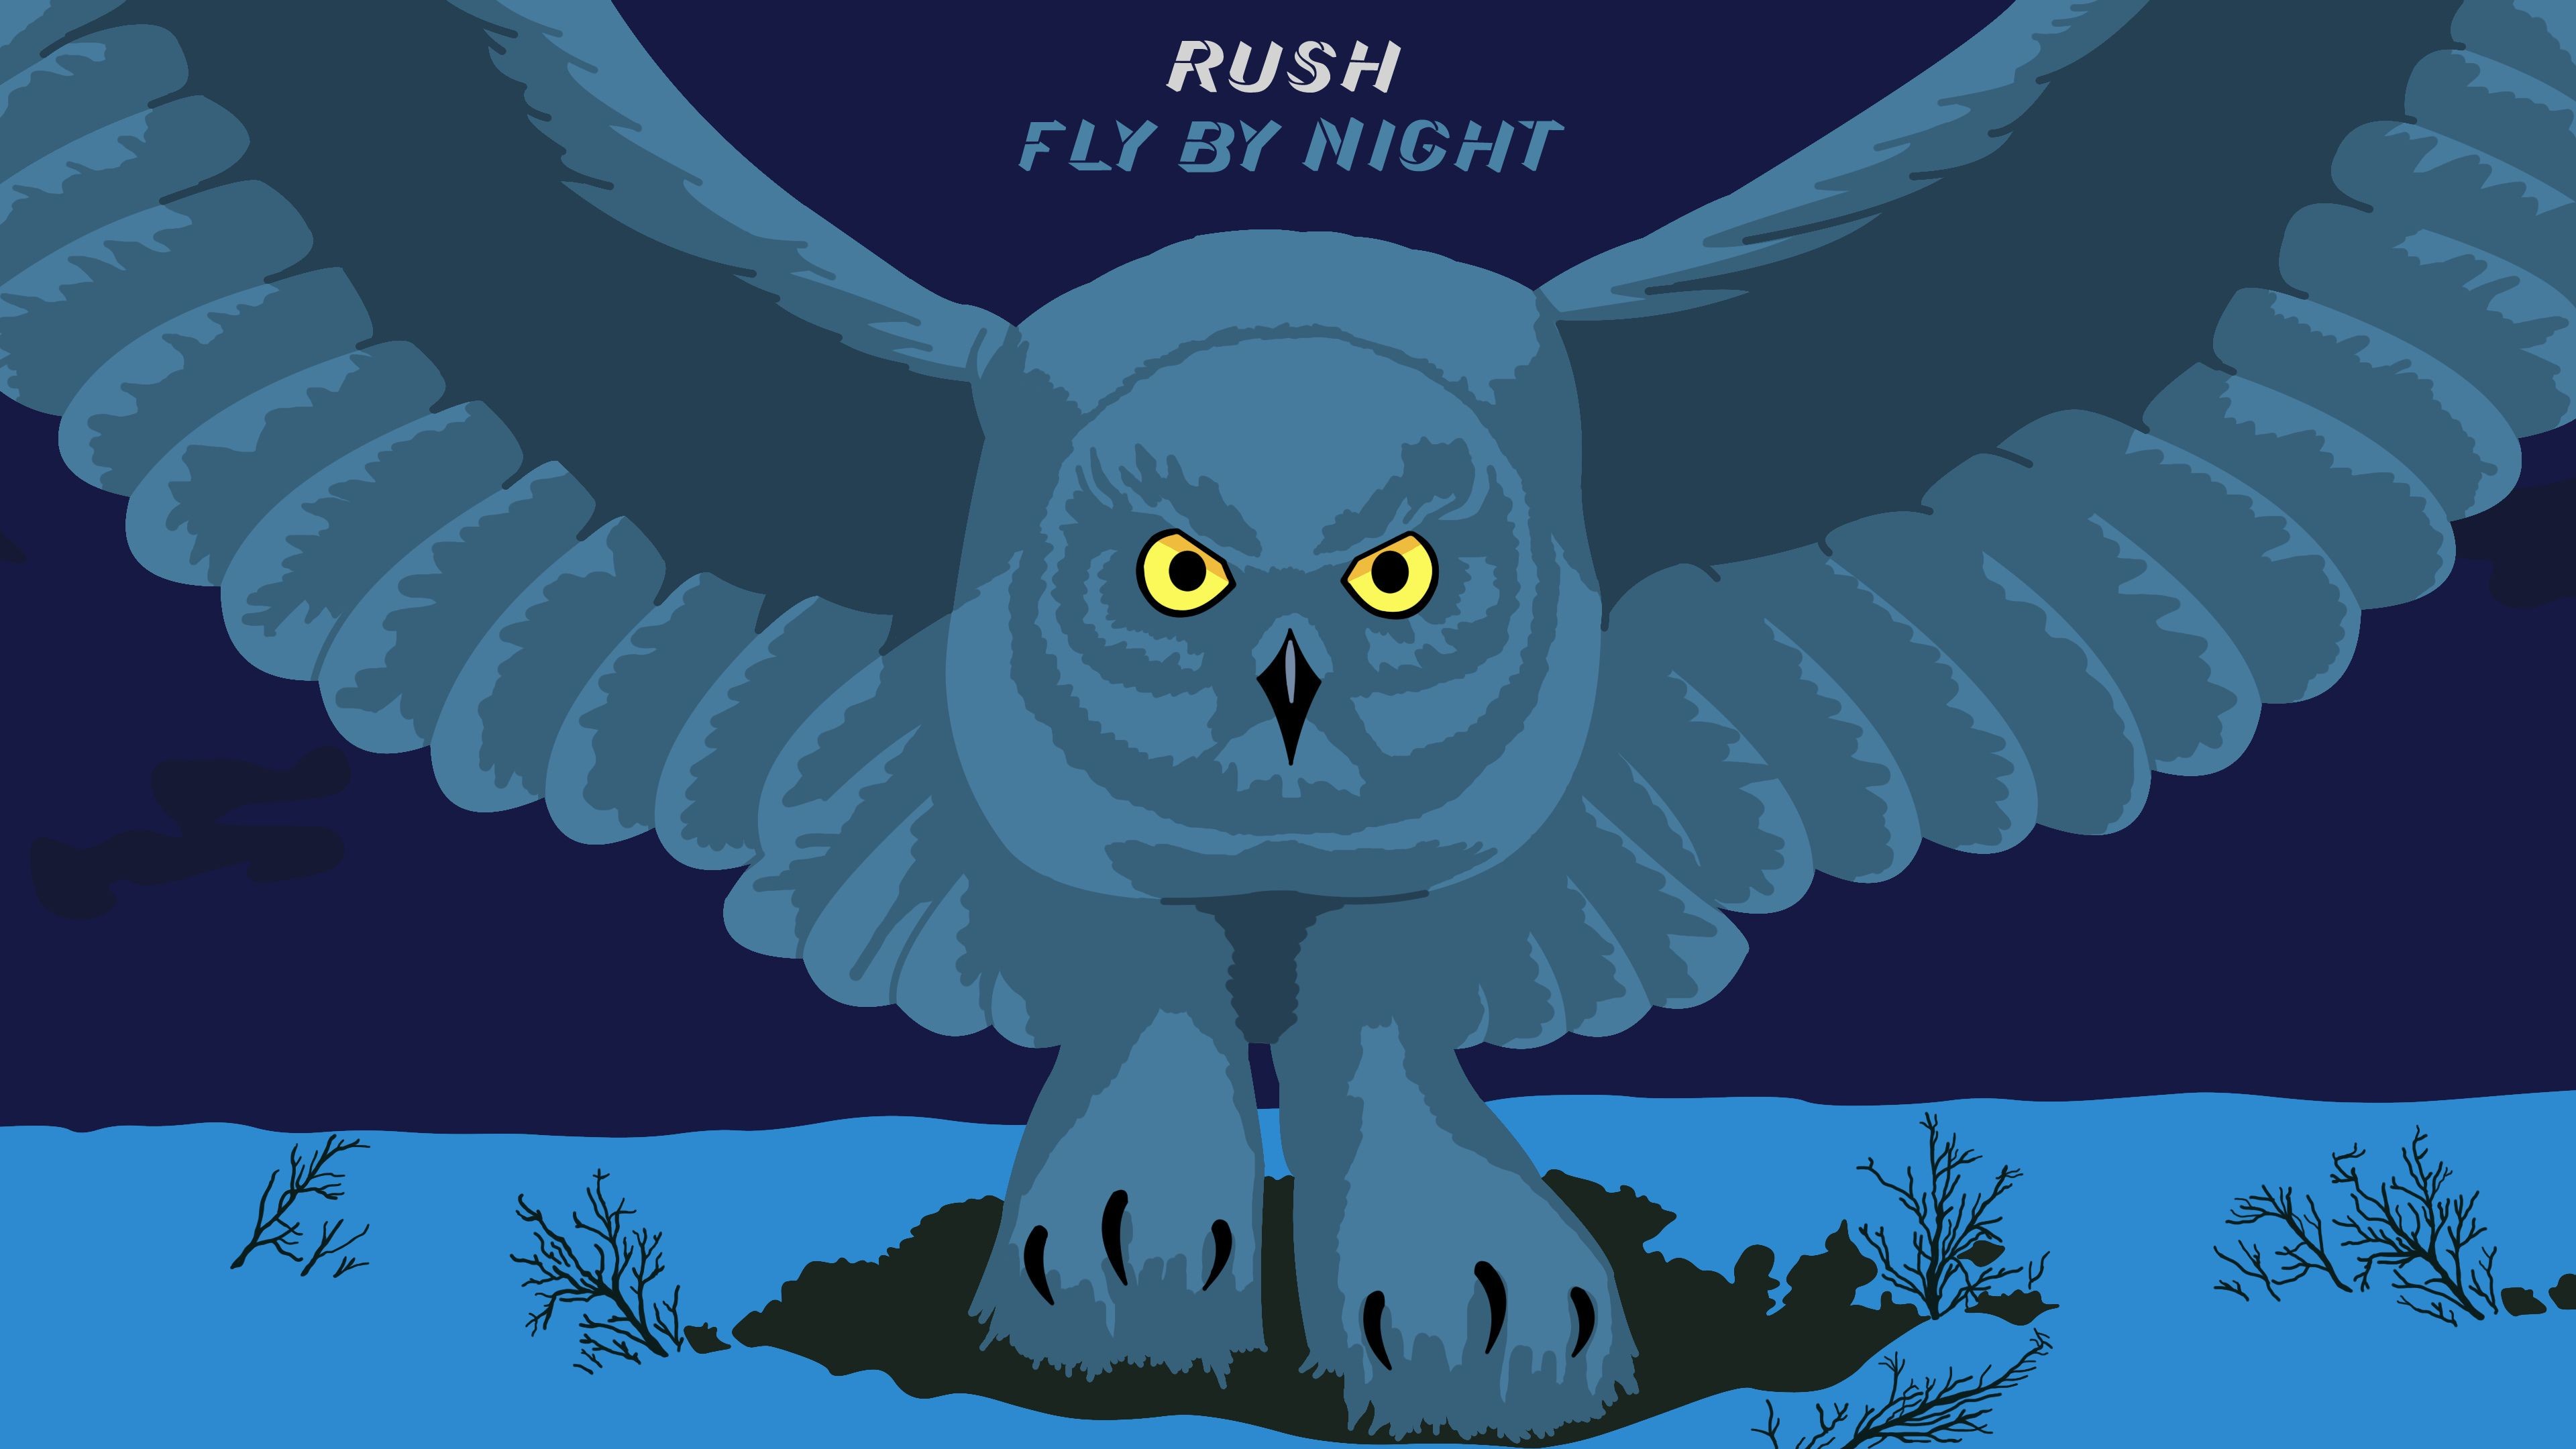 3840x2160 Fly by Night wallpaper, anyone? Made to go with the Windows 10